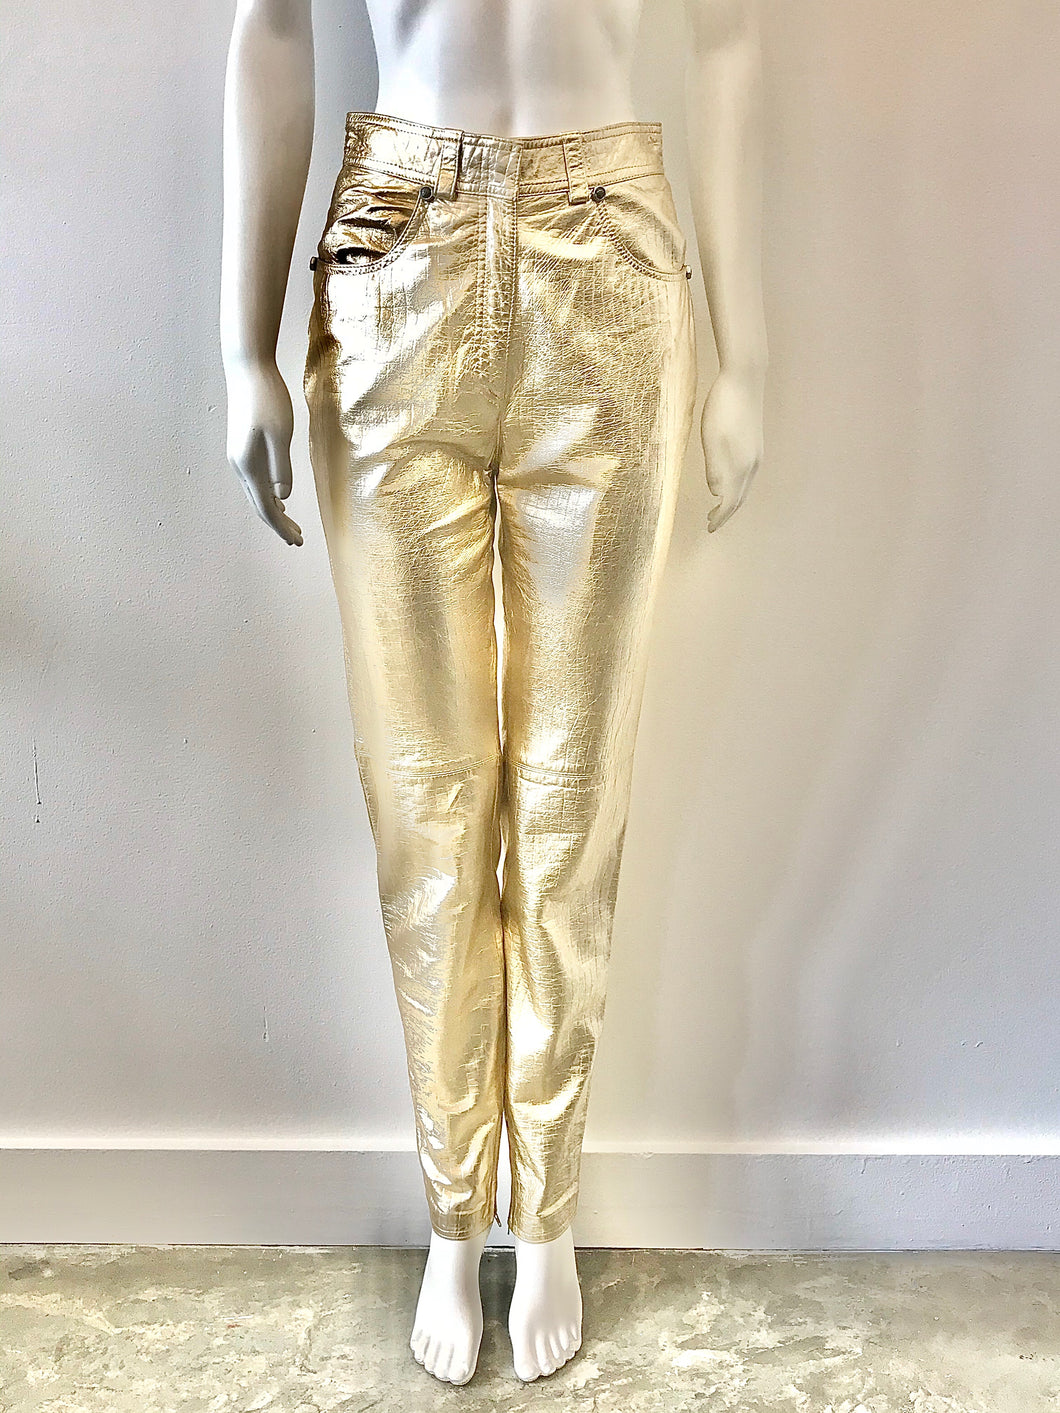 1980's Metallic Gold Reptile Print Leather Pants By Gianni Versace